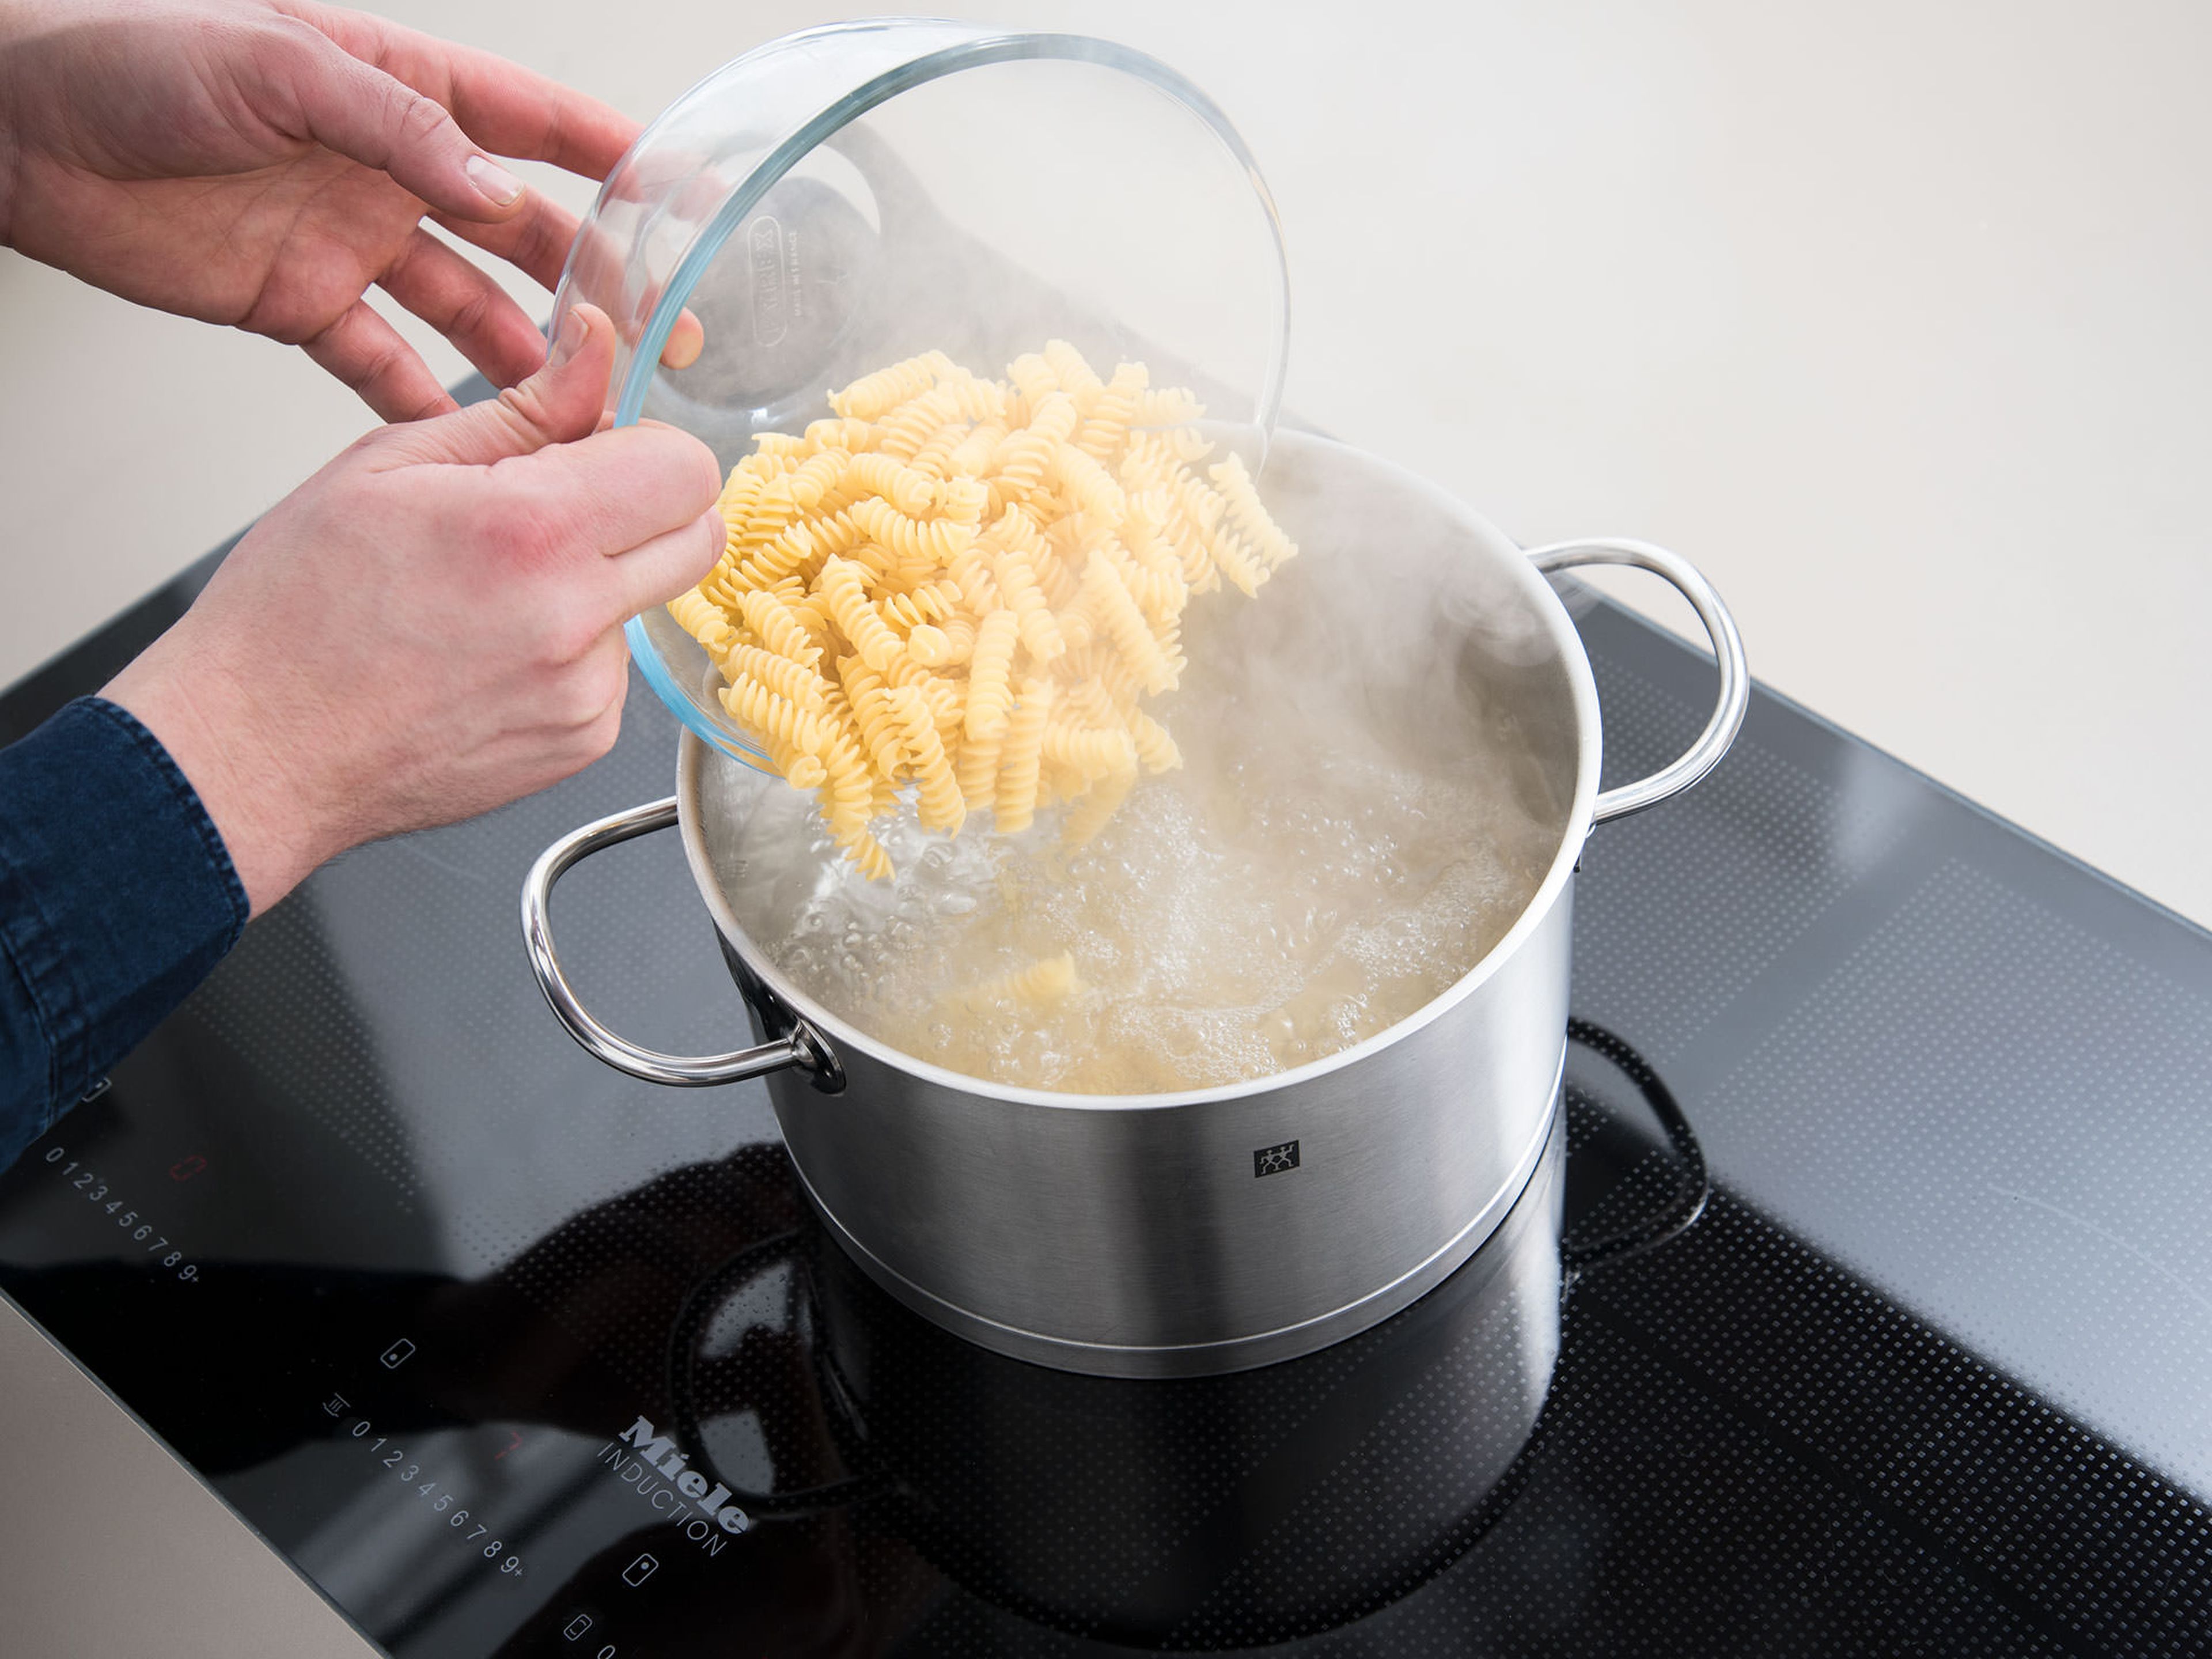 In a pot, bring some water to a boil, add salt and cook pasta according to package instructions until al dente. In the meantime, preheat oven to 200°C/390°F.